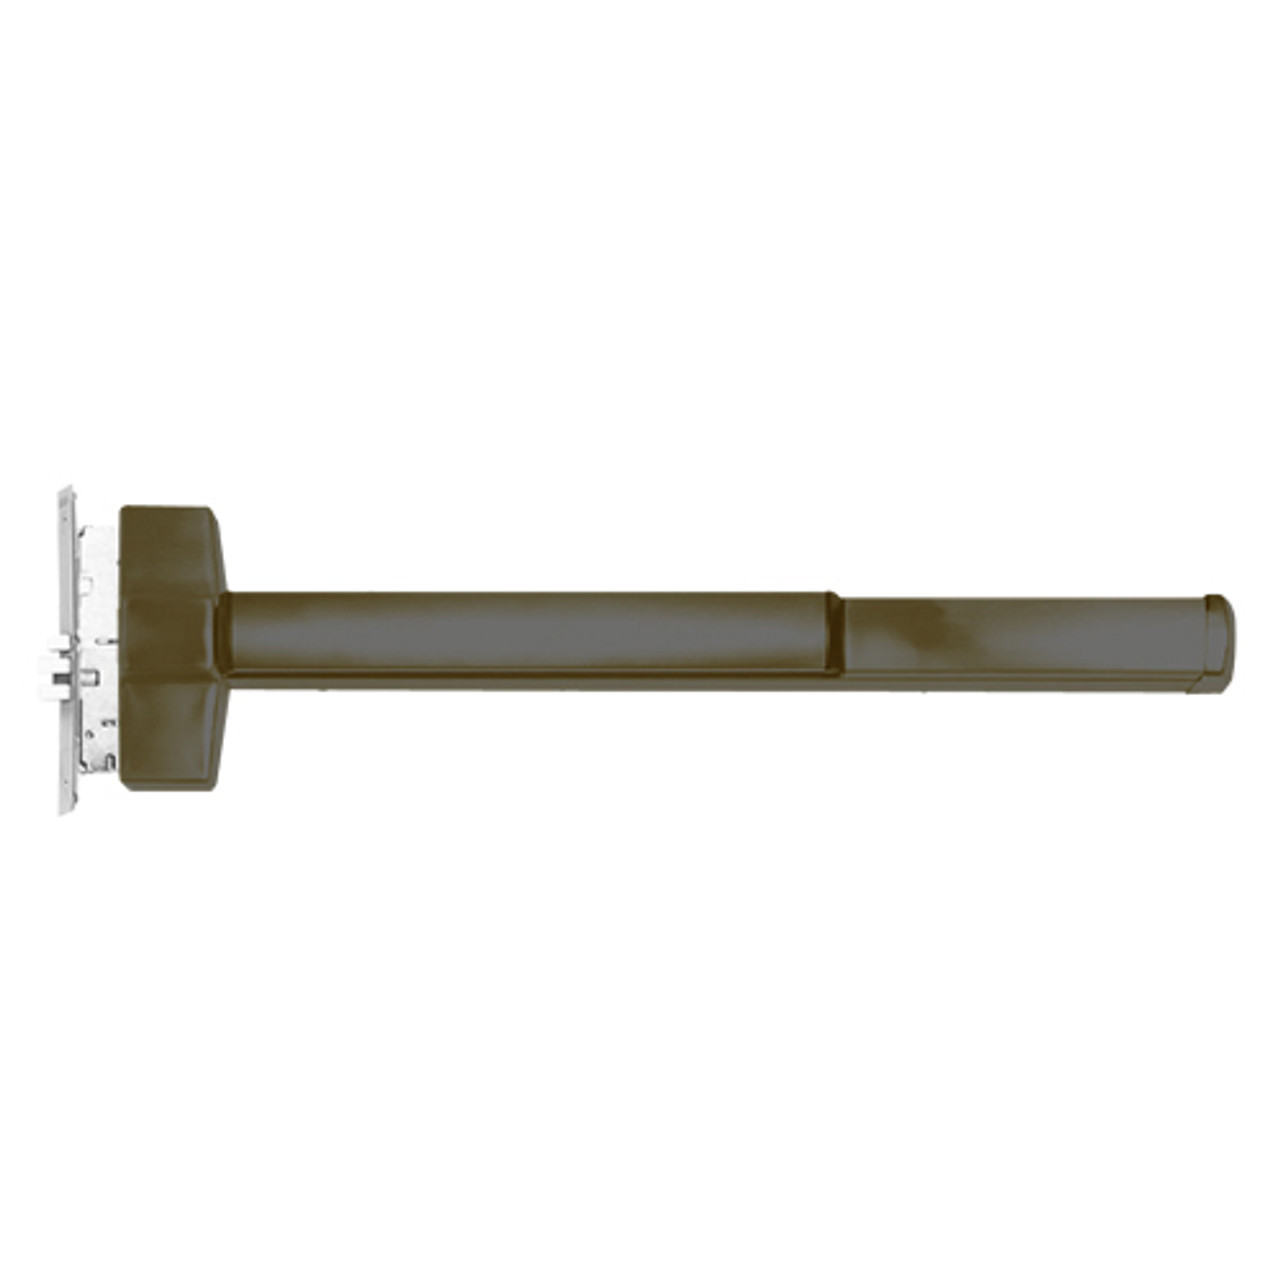 ED5600ATD-613-RHR Corbin ED5600 Series Fire Rated Mortise Exit Device with Delayed Egress in Oil Rubbed Bronze Finish